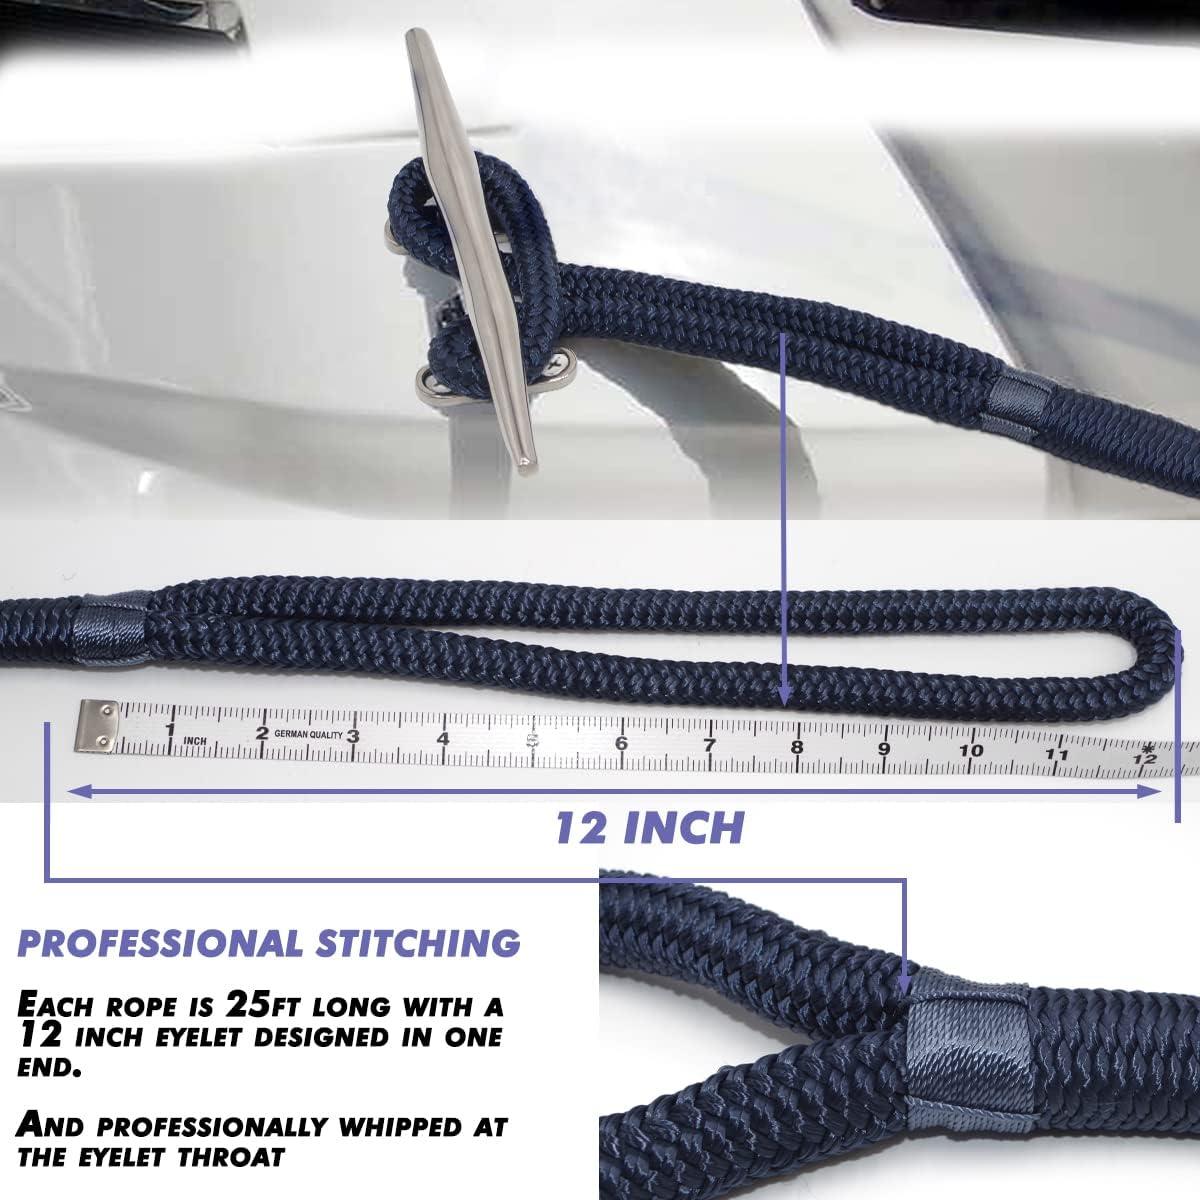 INNOCEDEAR 2 Pack Premium Navy Blue Dock Lines - 15' / 25'/35' with  Eyelet.Double Braided Nylon Dock Line/Mooring Lines.Hi-Performance Marine  Boats Ropes Navy blue-25ft